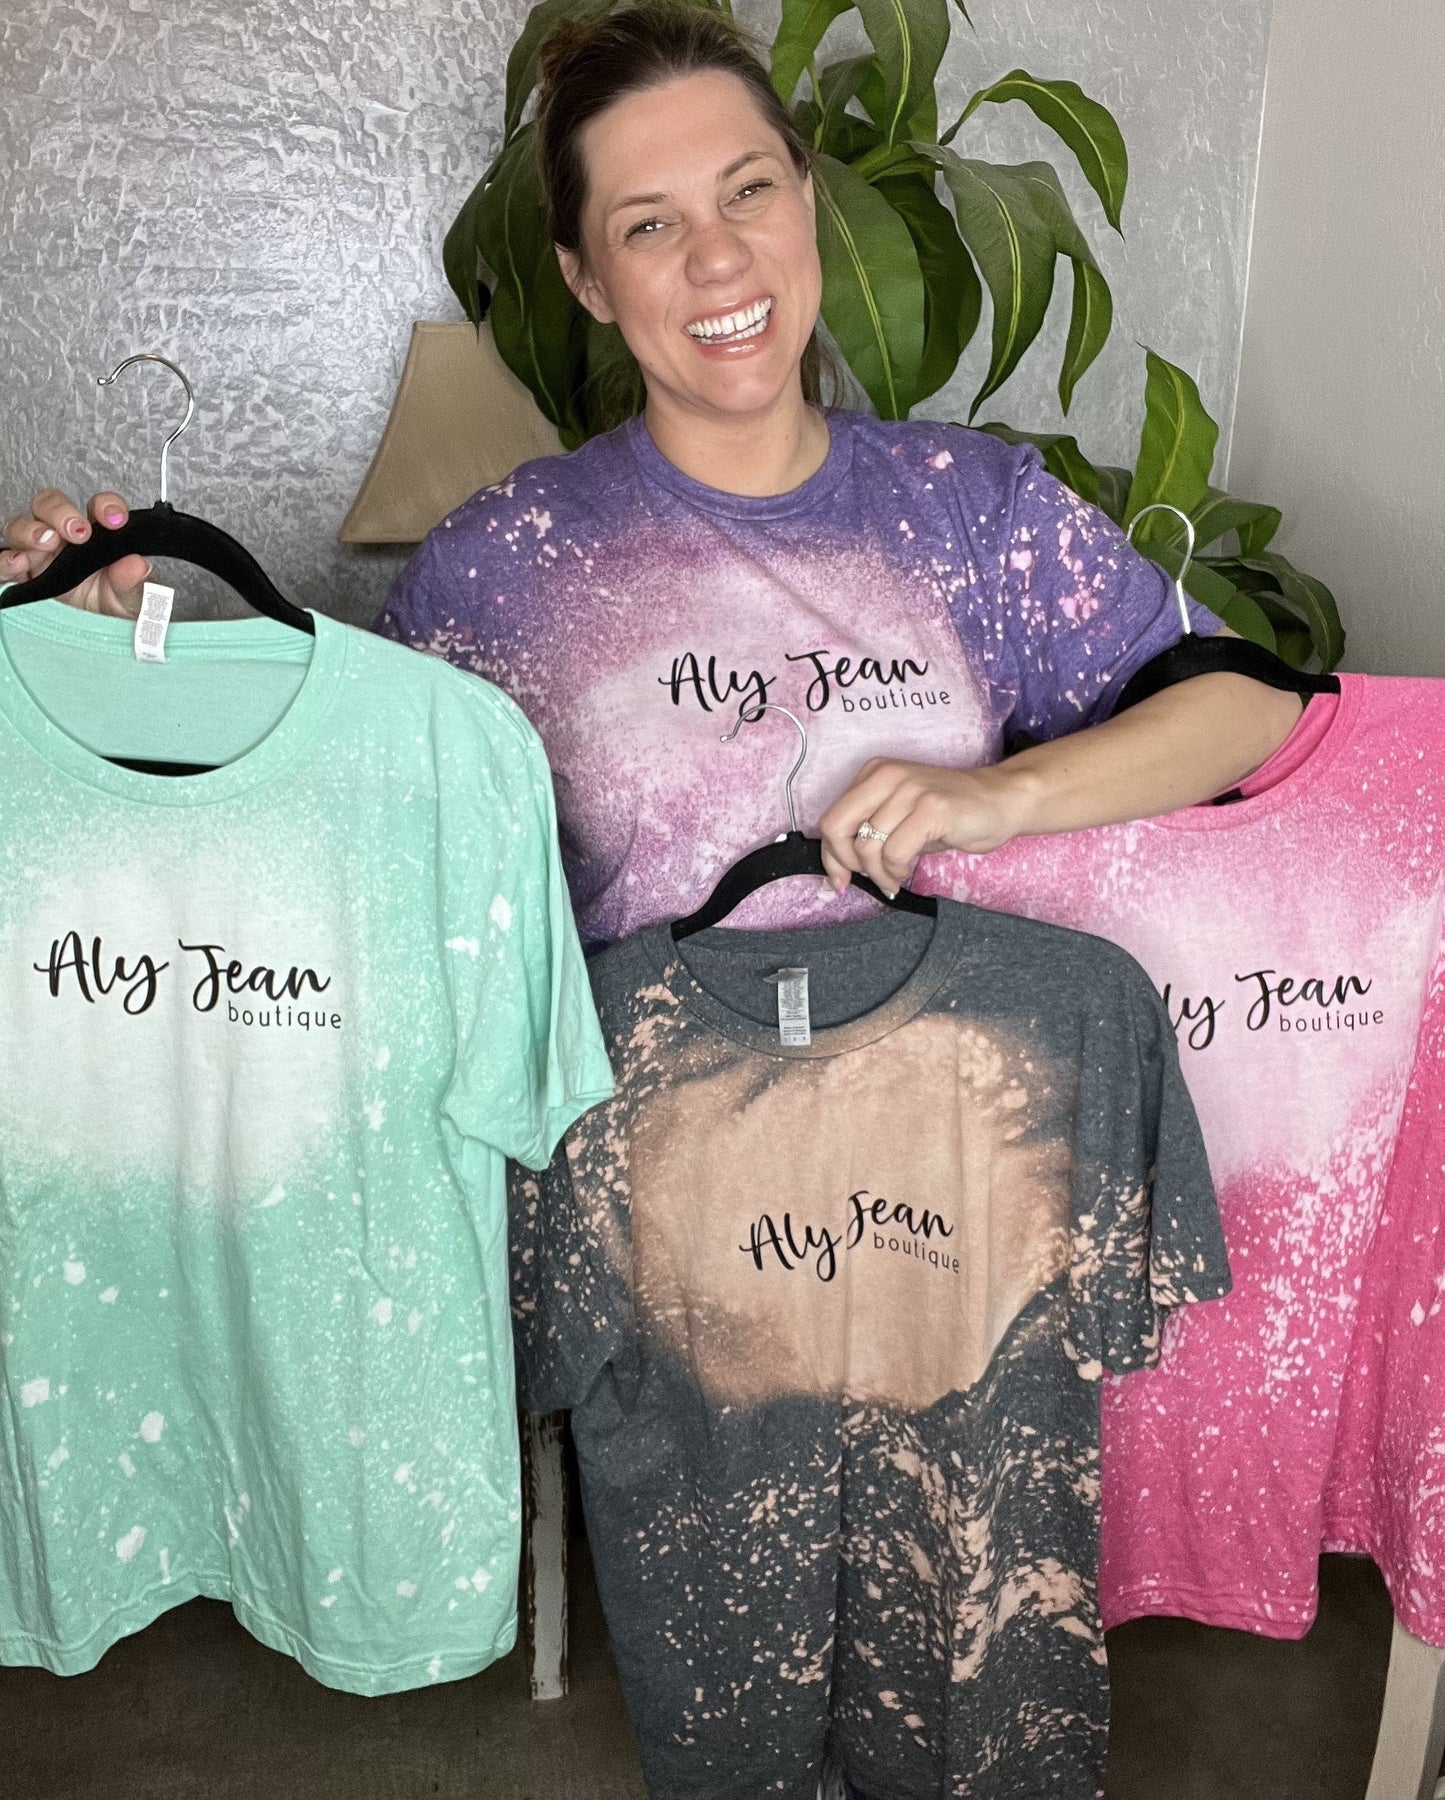 Aly Jean Boutique Custom Tees!